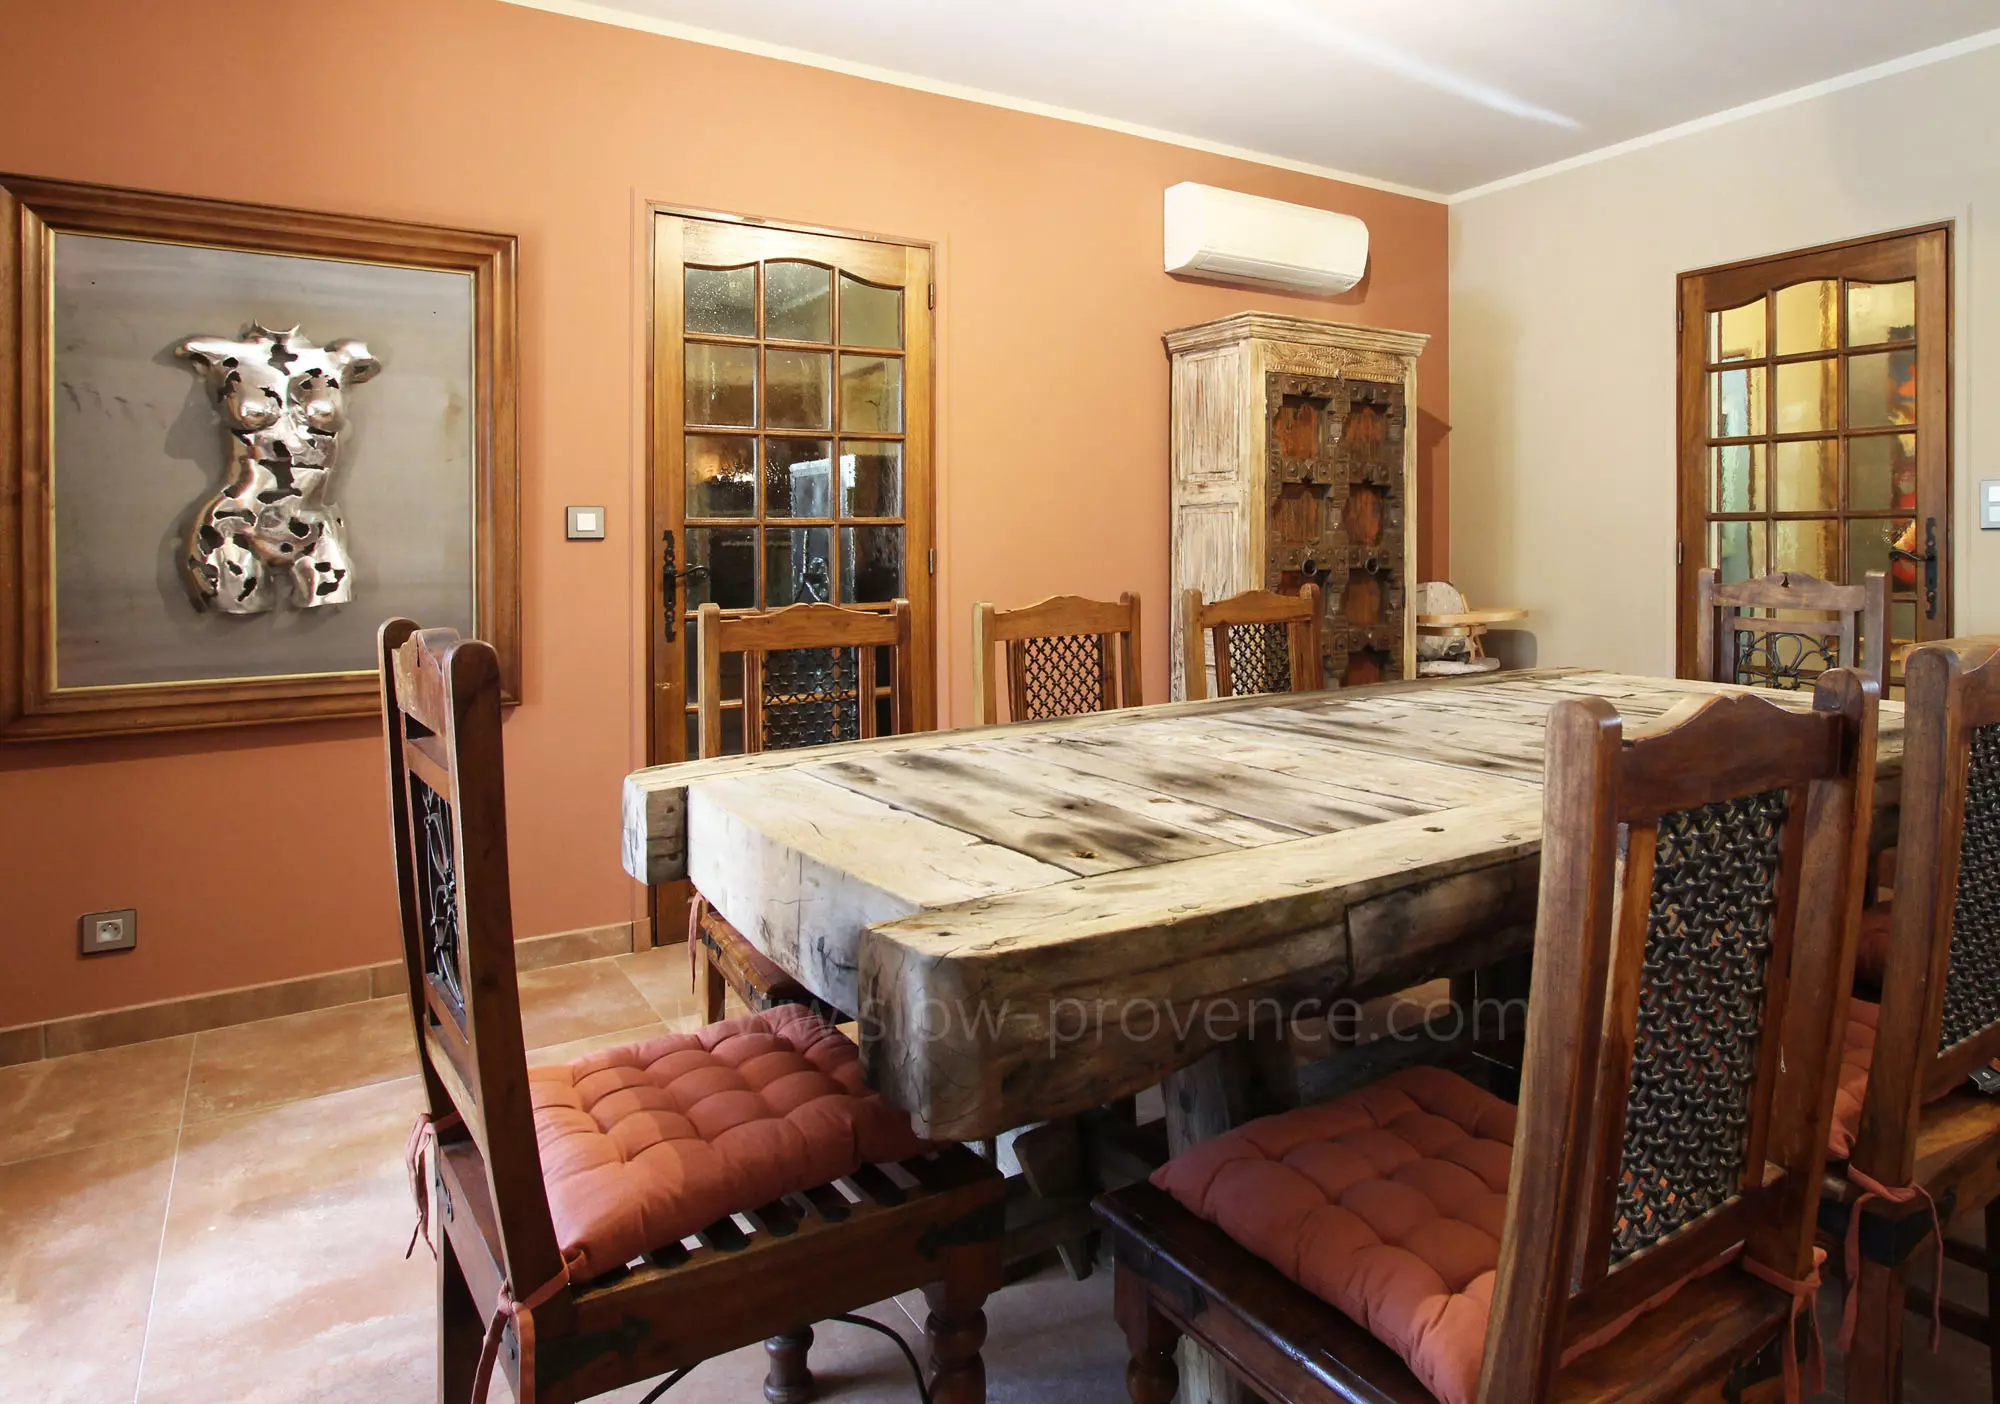 The convivial dining area